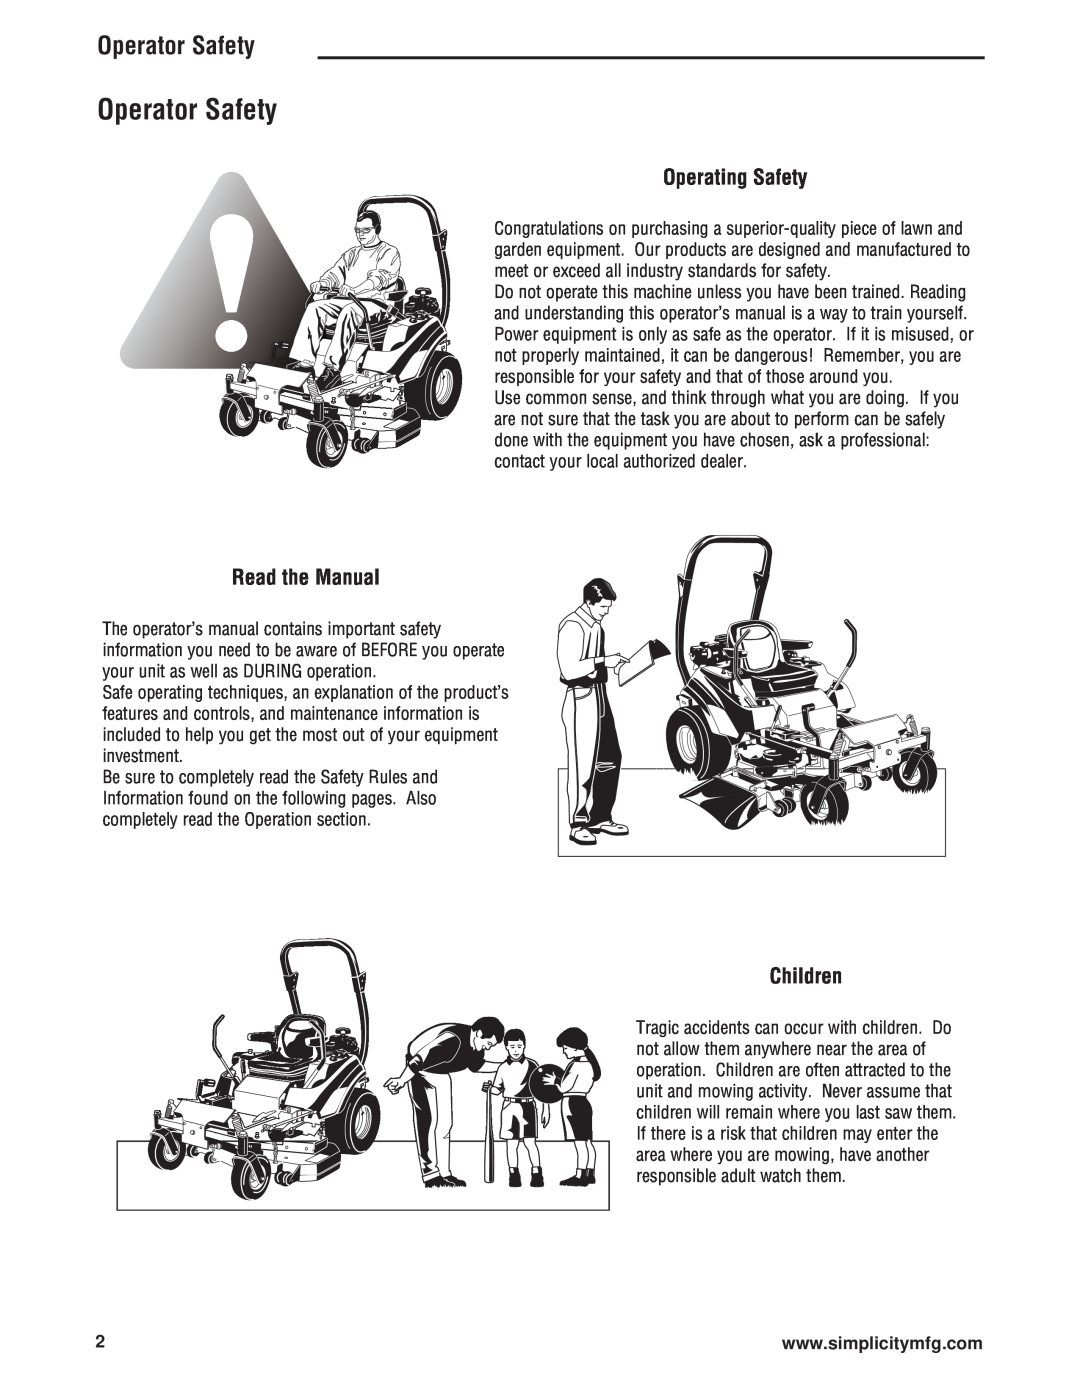 Simplicity 543777-0113-E1, 5101604 manual Operator Safety, Operating Safety, Read the Manual, Children 